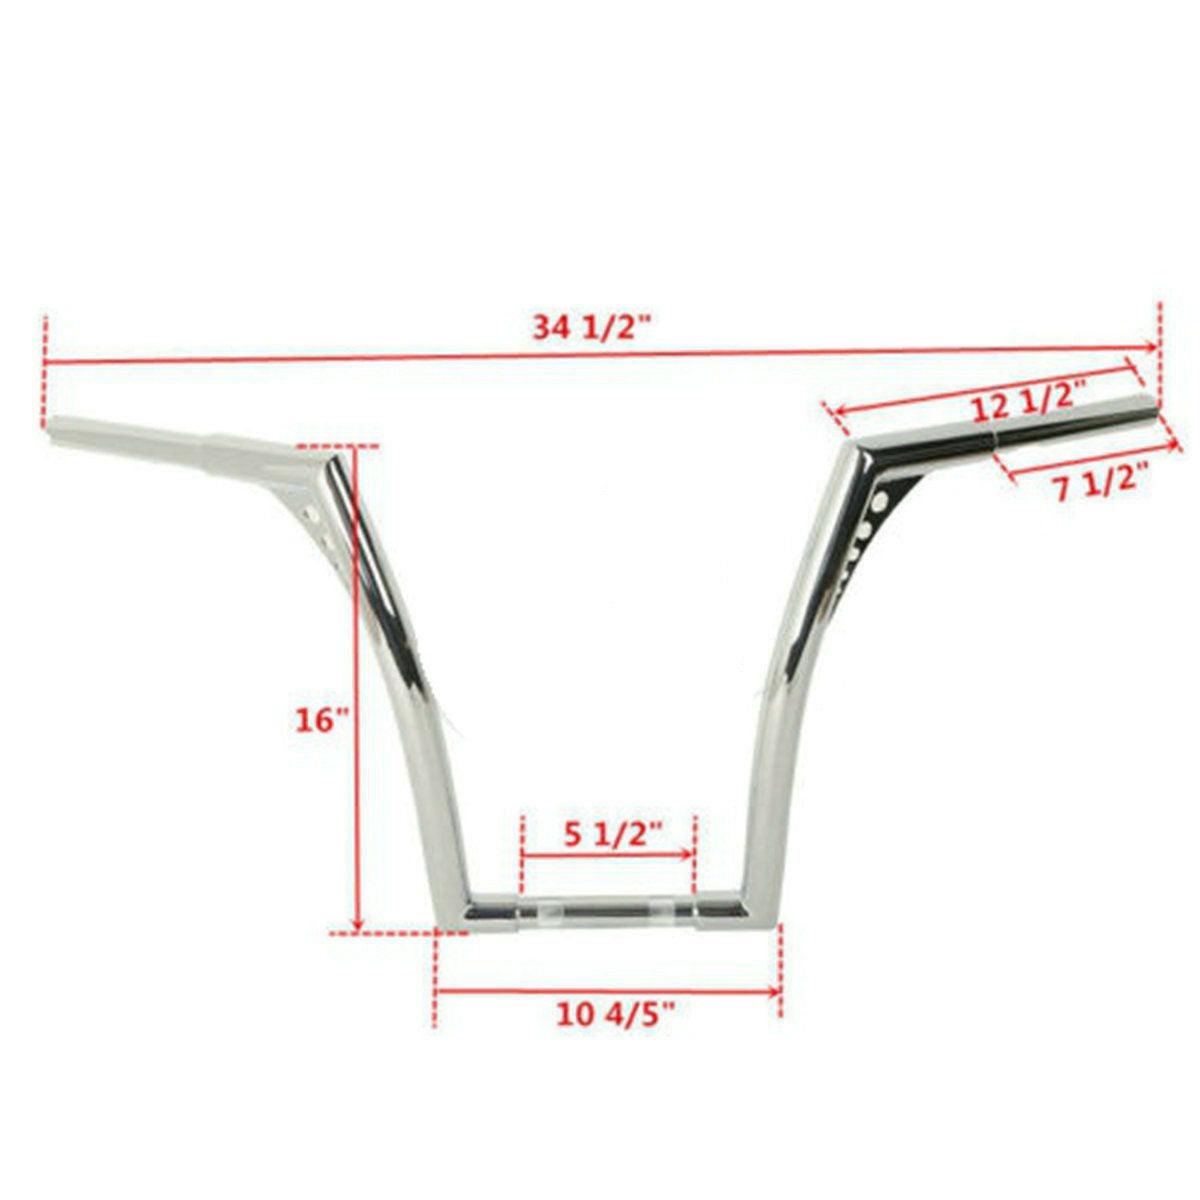 1 1/4" Fat 14" 16'' 18'' Rise Chrome Handlebar For Harley Softail Sportster FXST - Moto Life Products